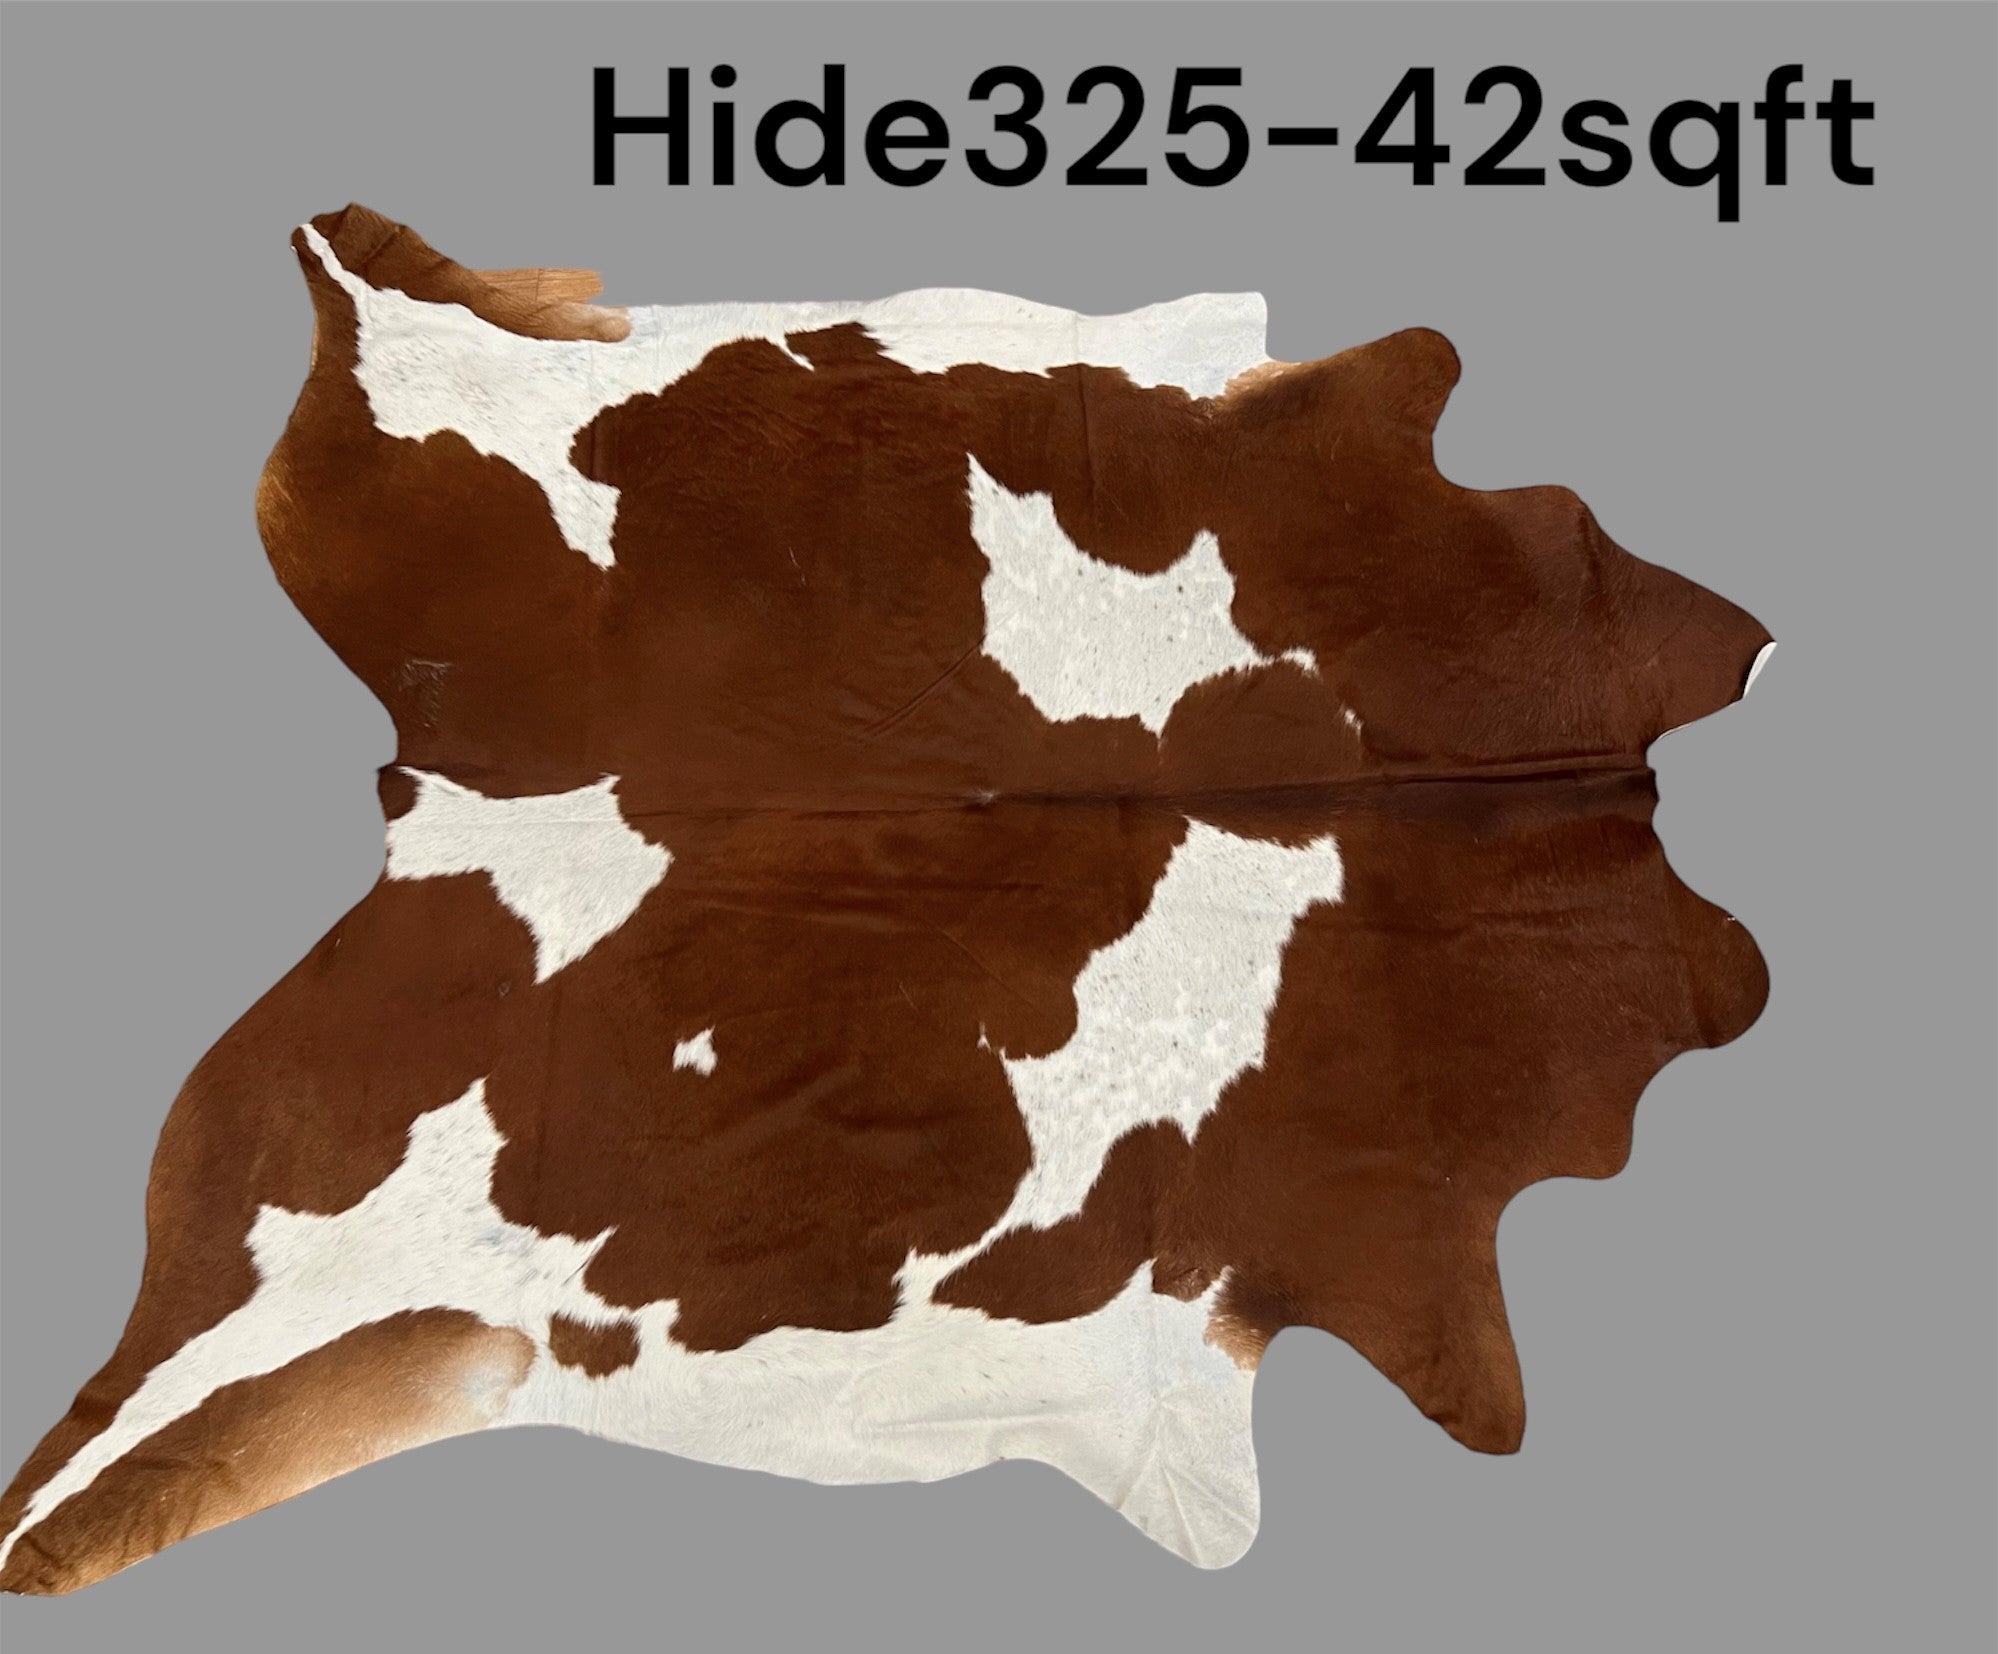 Natural Hair On Cow Hide : This Hide Is Perfect For Wall Hanging, Leather Rugs, Leather Upholstery & Leather Accessories. (Hide325)